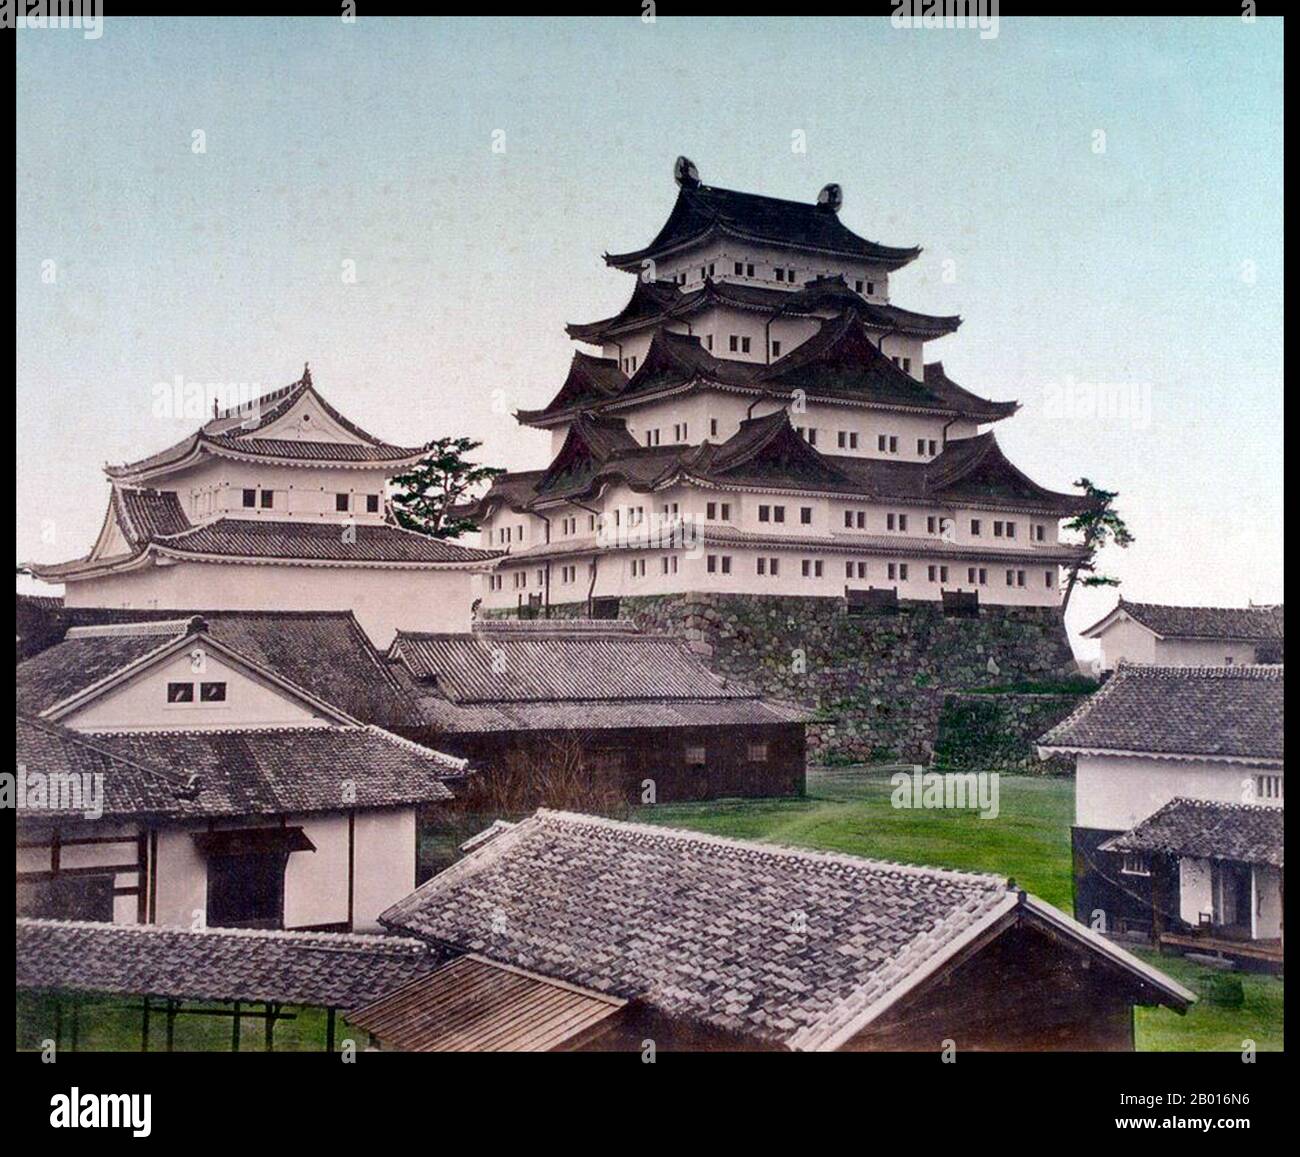 Japan: Nagoya Castle. Photograph by Tamamura Kozaburo (1856-1923), c. 1879.  Nagoya Castle (Nagoya-jō) is a castle located in Nagoya, central Japan. It was built by the Owari Domain in 1612. During the Edo period, Nagoya Castle was the centre of one of the most important castle towns in Japan—Nagoya-juku— and it included the most significant stops along the Minoji, which linked the Tōkaidō with the Nakasendō (major national highways). Stock Photo